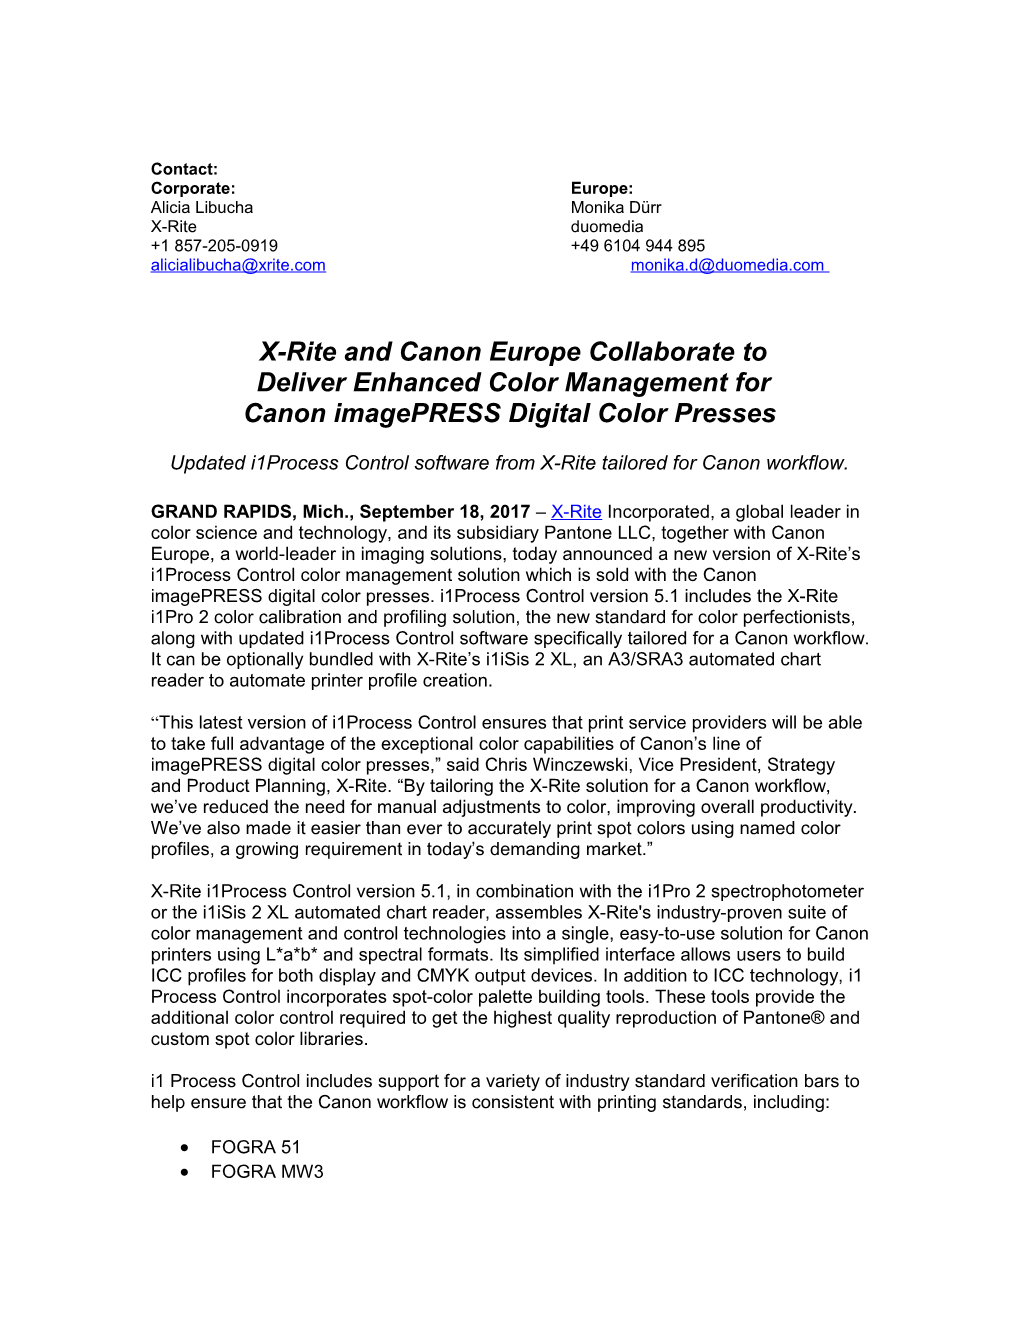 X-Rite and Canon Europe Collaborate to Deliver Enhanced Color Management for Canon Imagepress